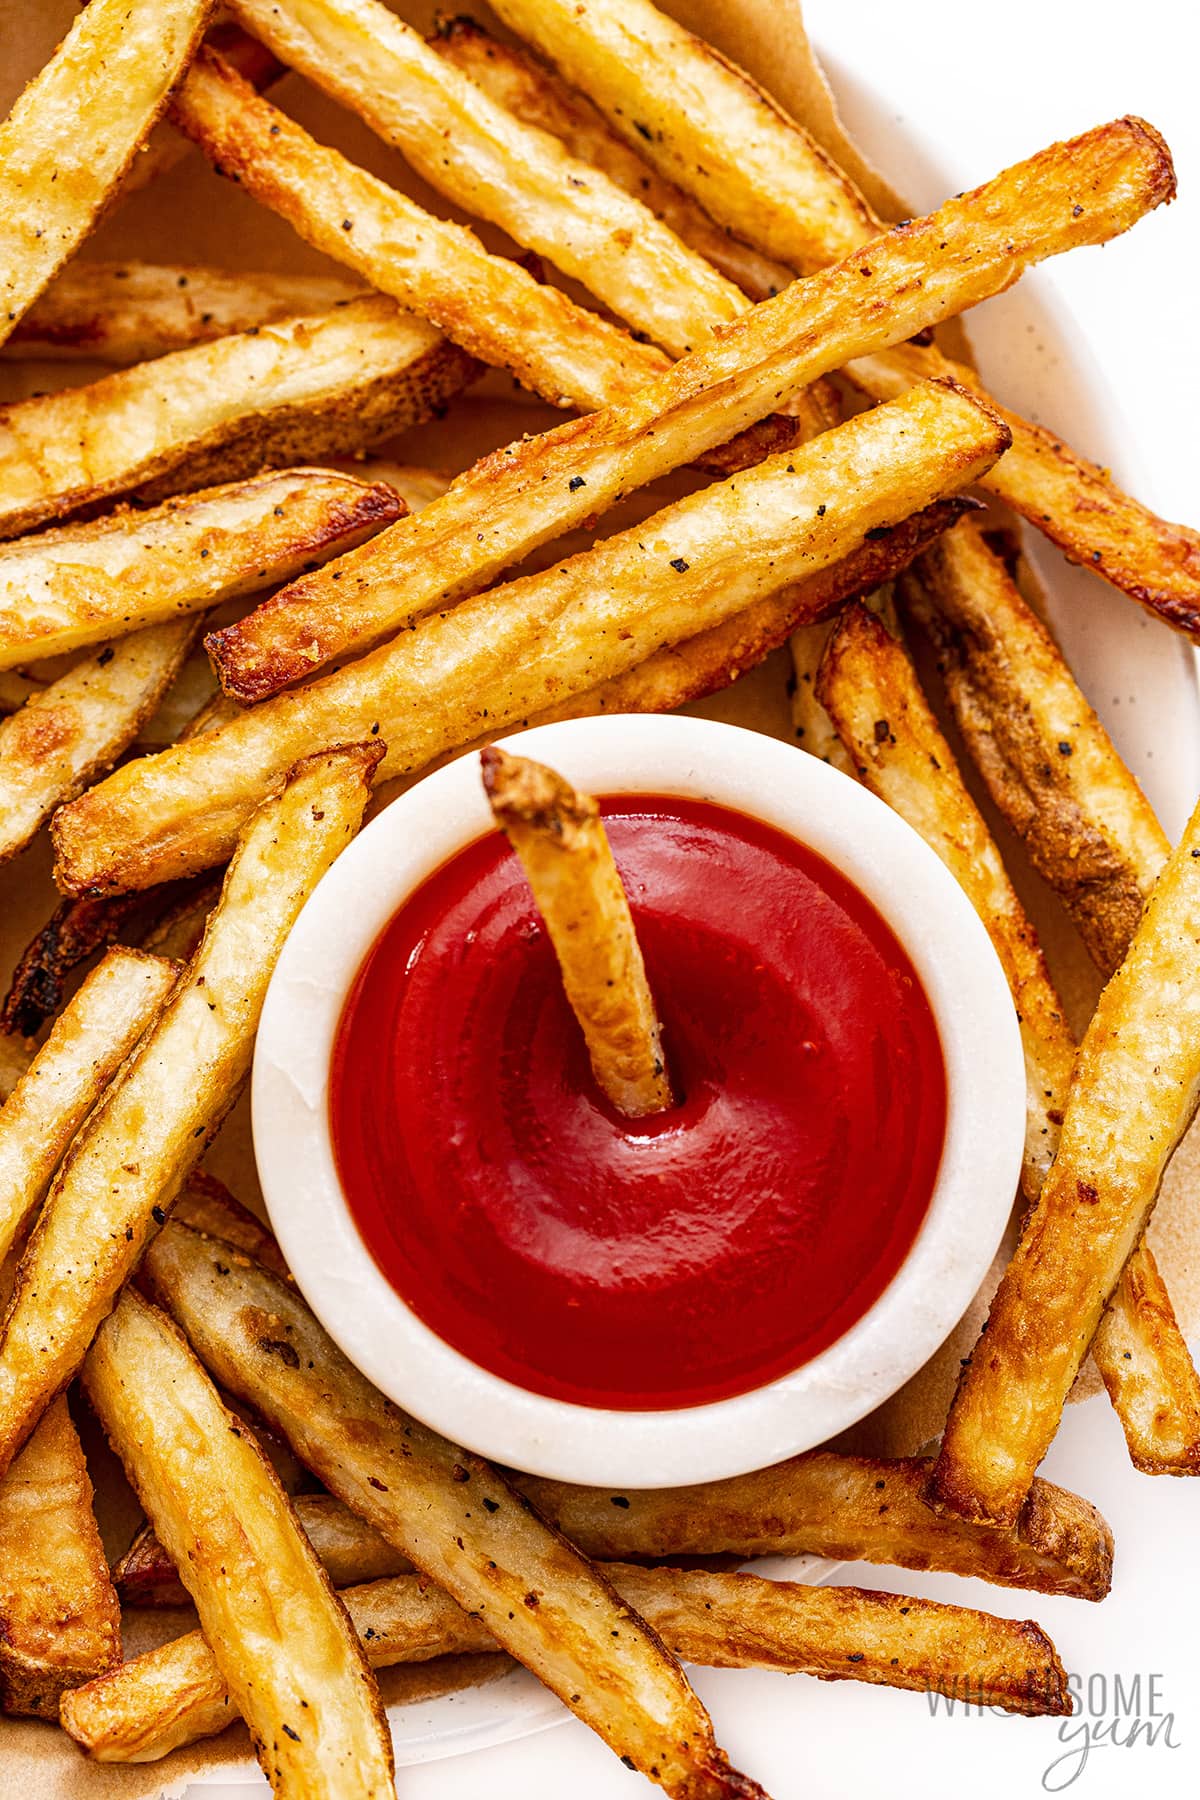 Air fryer french fries with one dunked in ketchup.